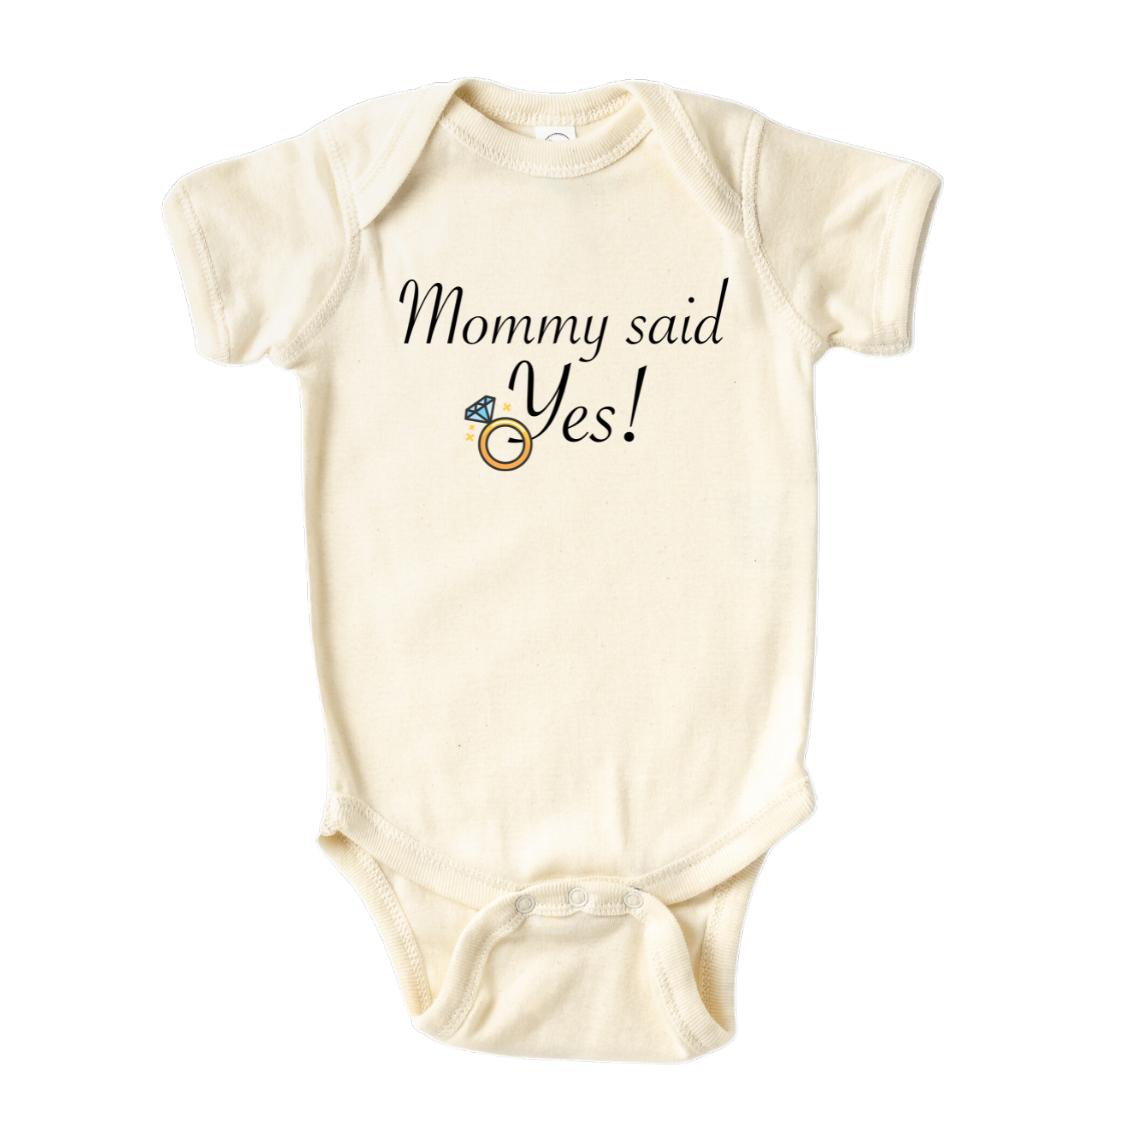 Mommy Said Yes Baby Onesie® Proposal Baby Outfit for Baby Gift for Baby Shower Gift for Engagement